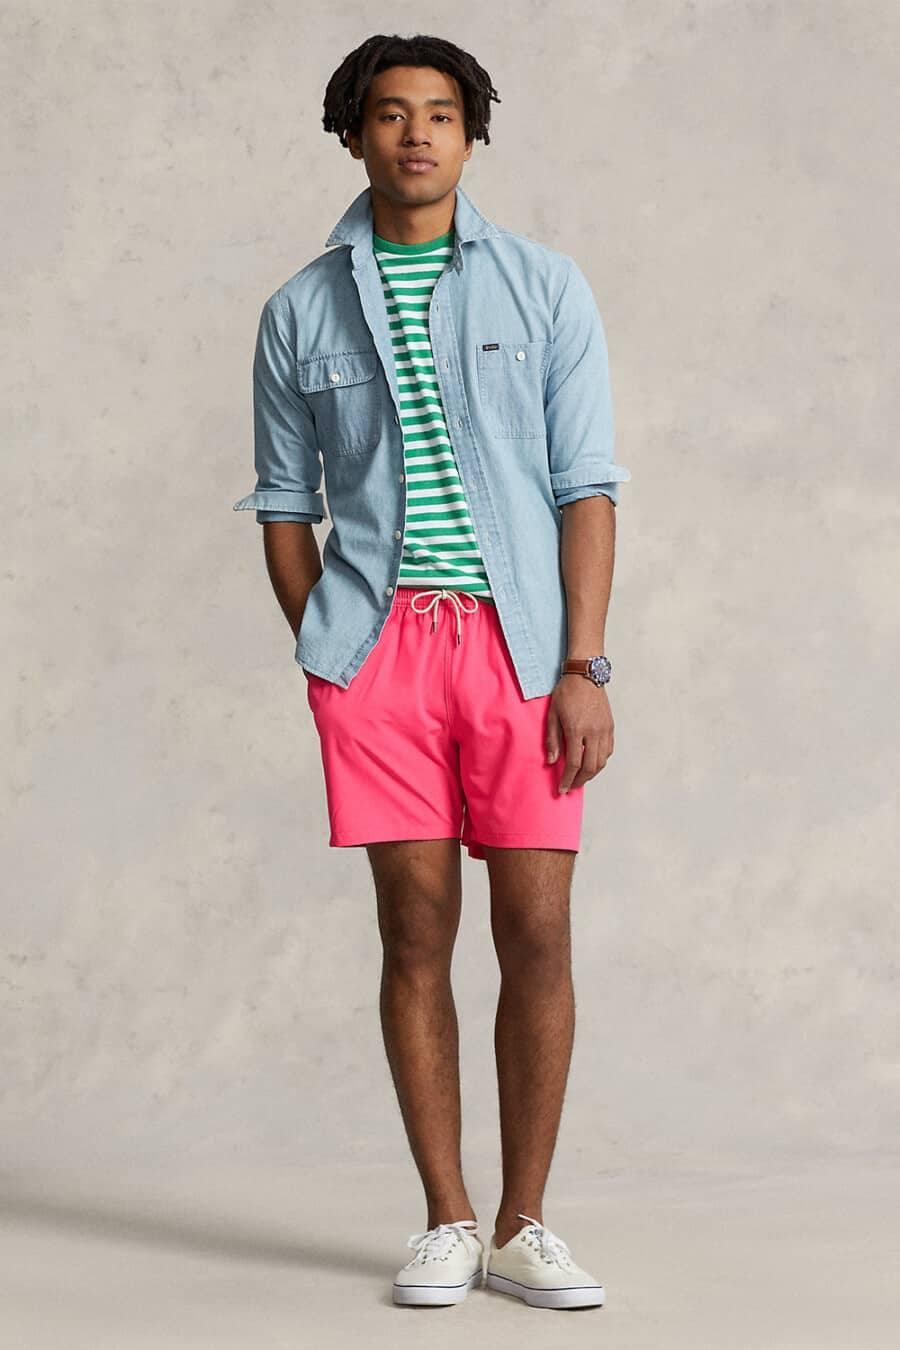 Men's bright pink swim shorts, white/green striped T-shirt, pale blue denim shirt and off-white canvas sneakers outfit